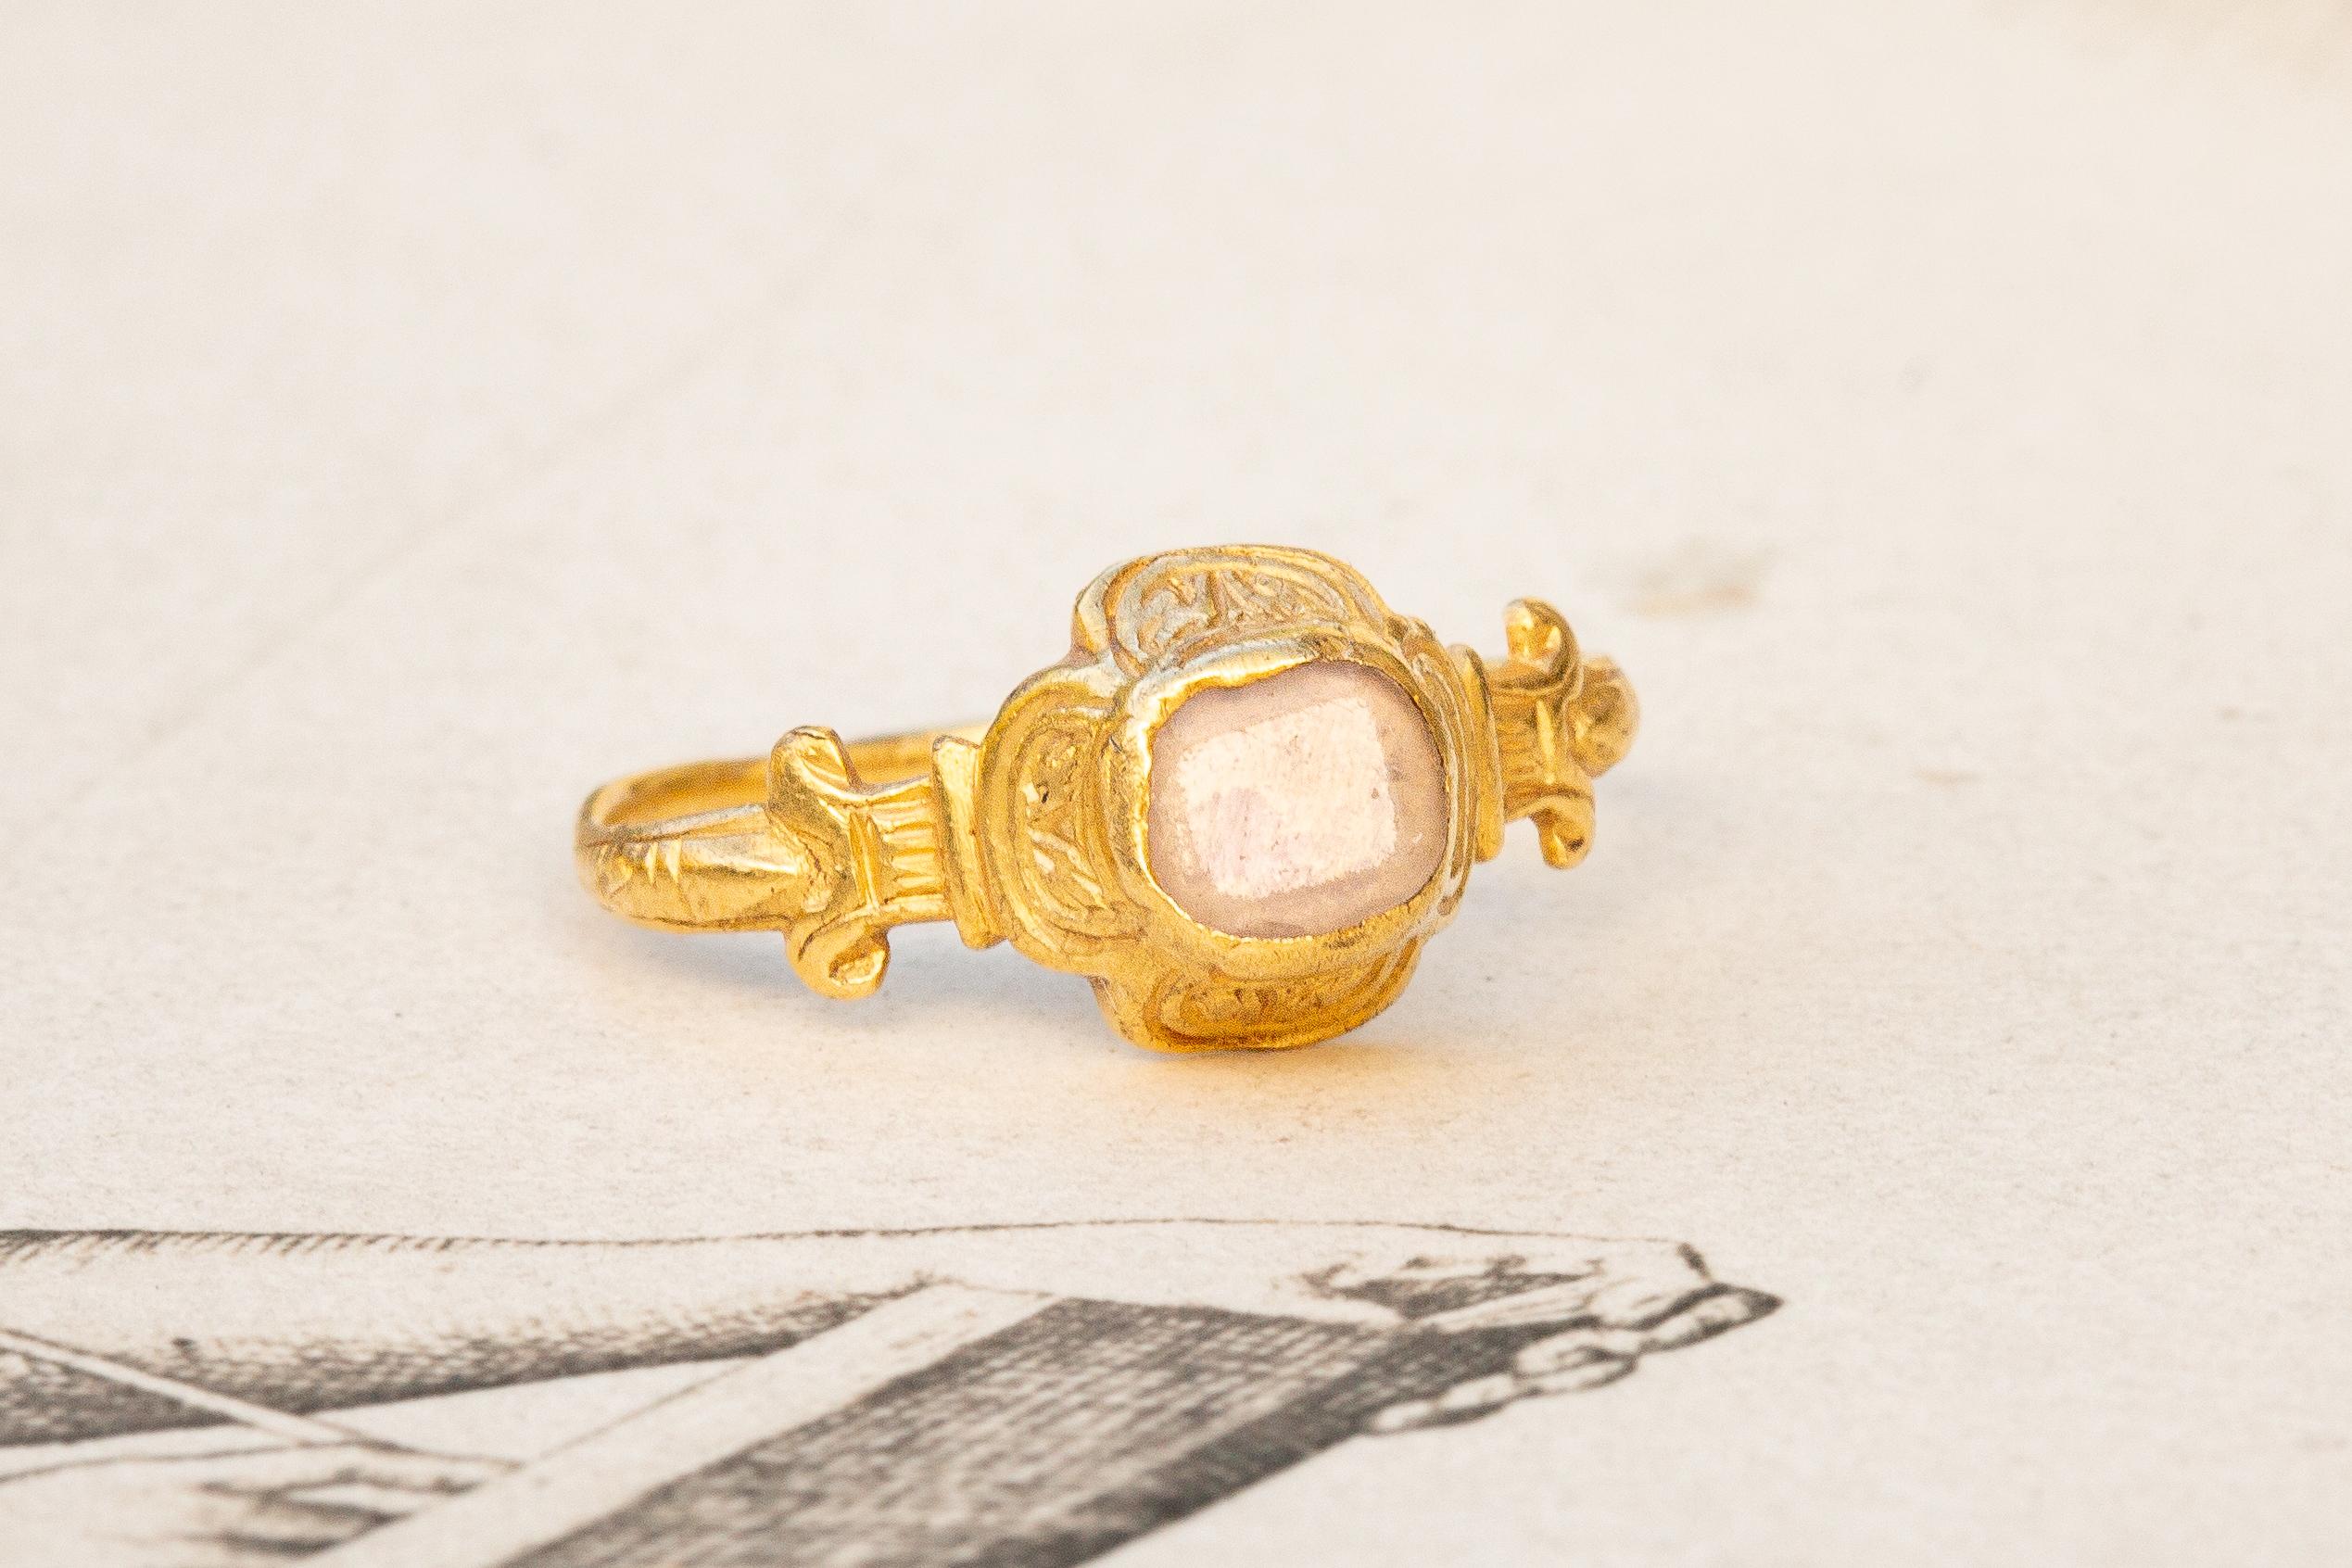 Scarce Renaissance 16th Century Rock Crystal Marriage Ring Medieval Middle Ages  For Sale 4